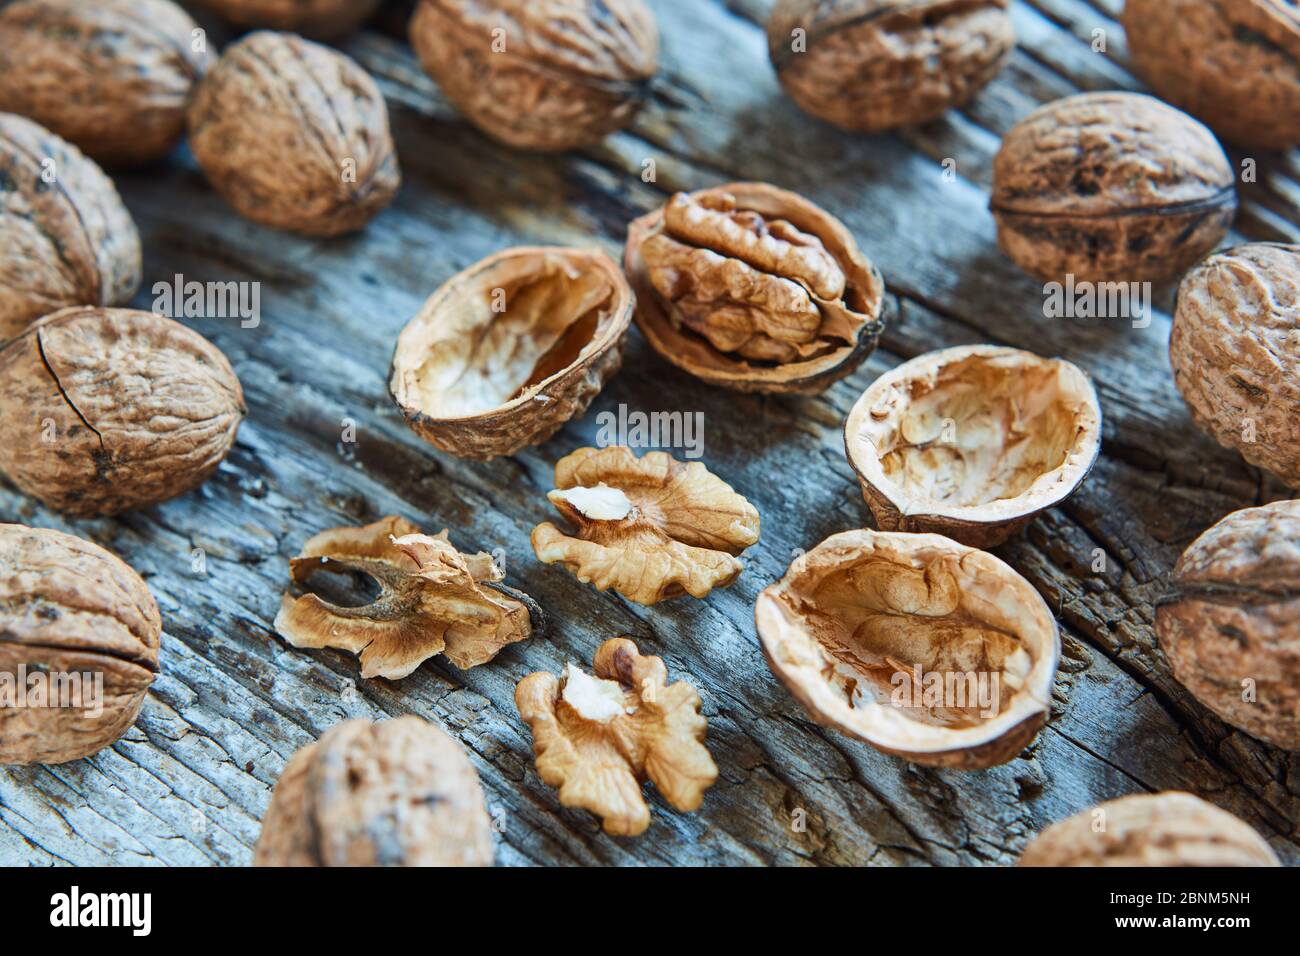 Walnuts, closed, open, supervision, wooden board Stock Photo